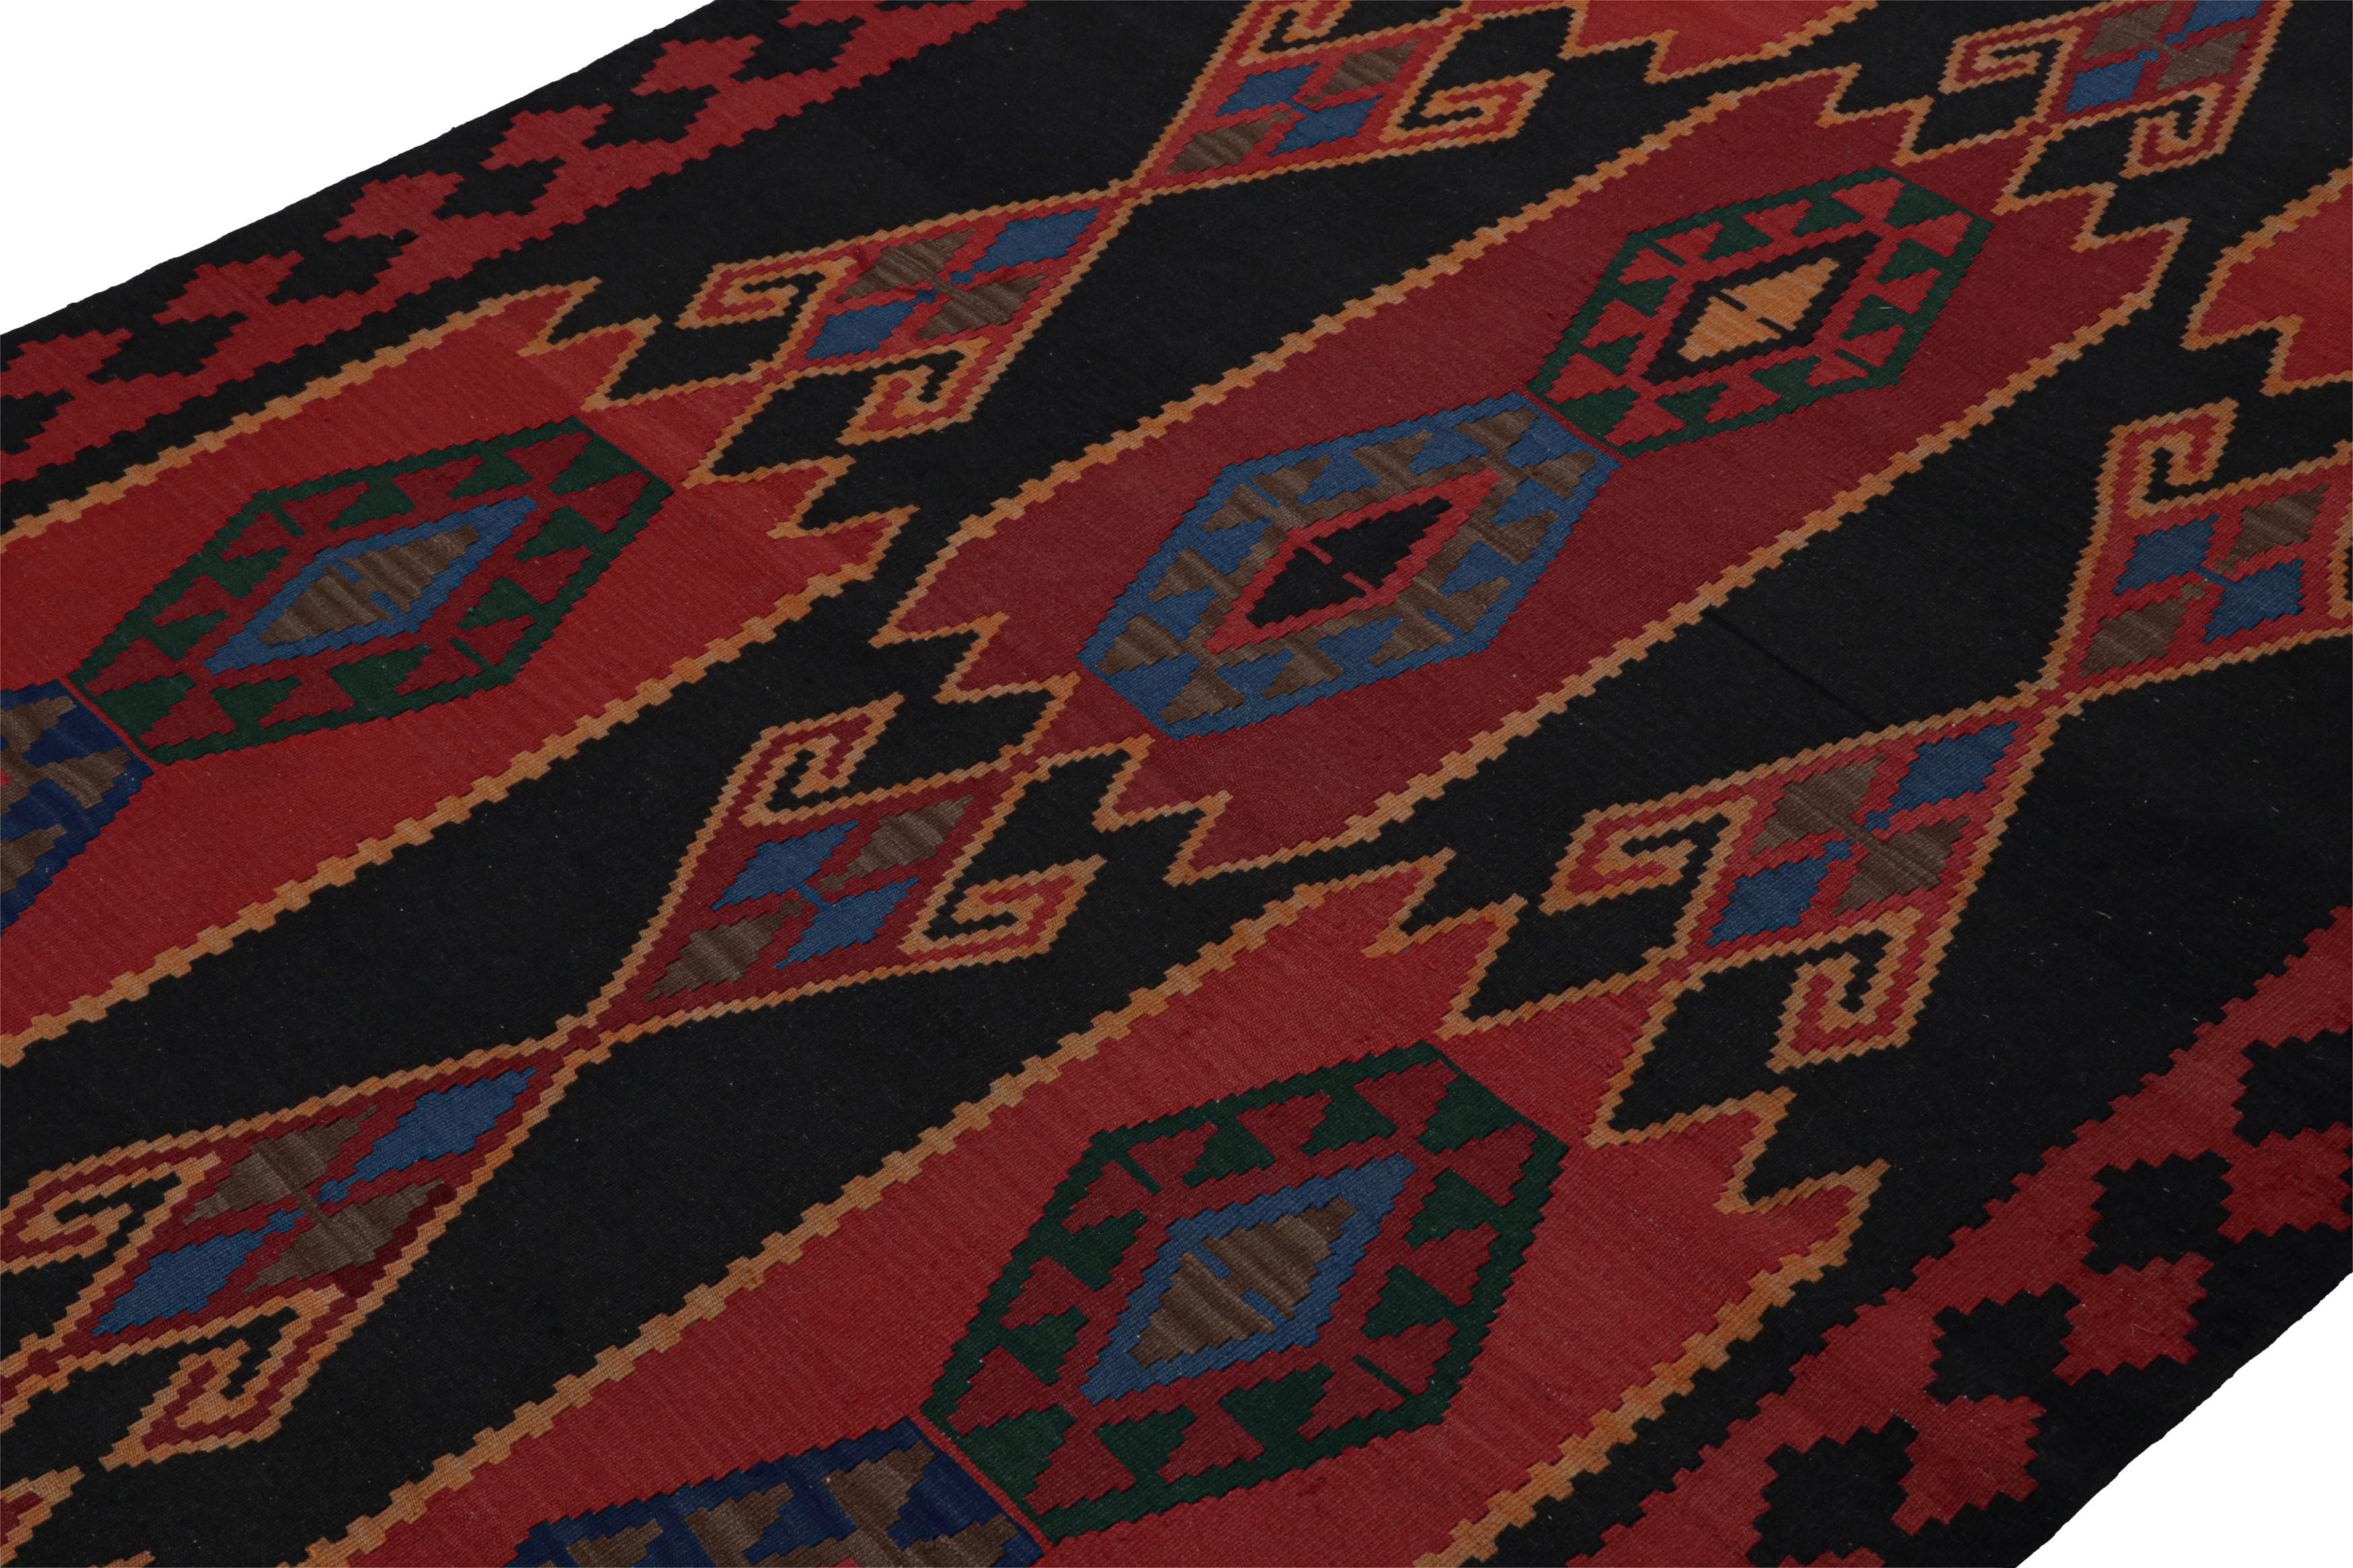 Hand-Woven Vintage Afghan Kilim Runner Rug, with Geometric Patterns, from Rug & Kilim For Sale